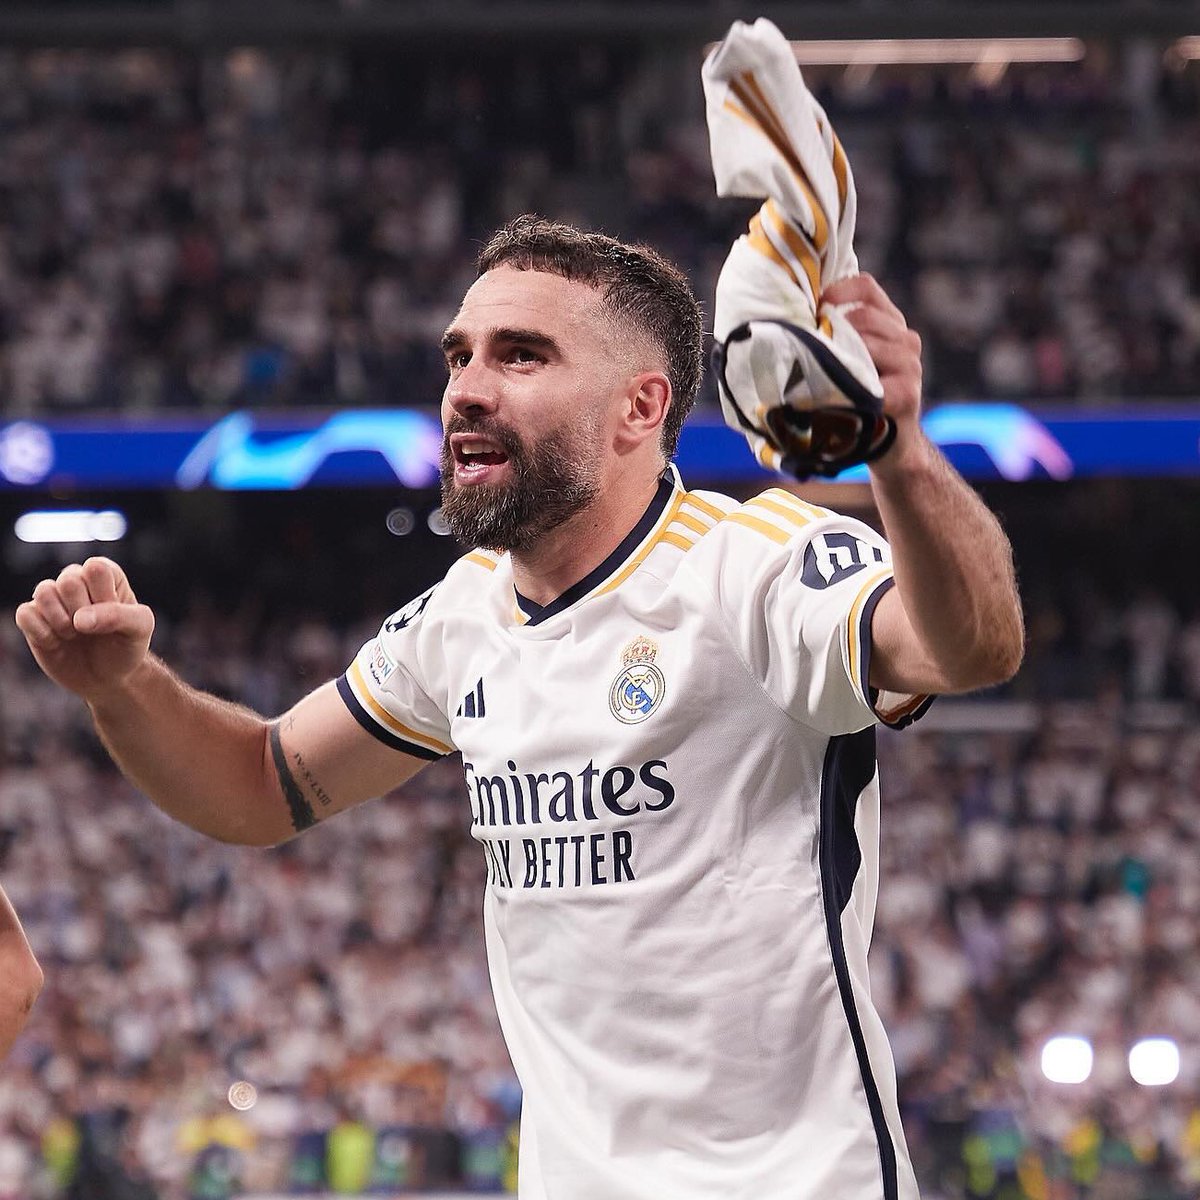 Dani Carvajal is having his best season EVER in terms of numbers - 5 goals, 5 assists so far in 38 games in all competitions.

Like fine wine. 🍷🪄